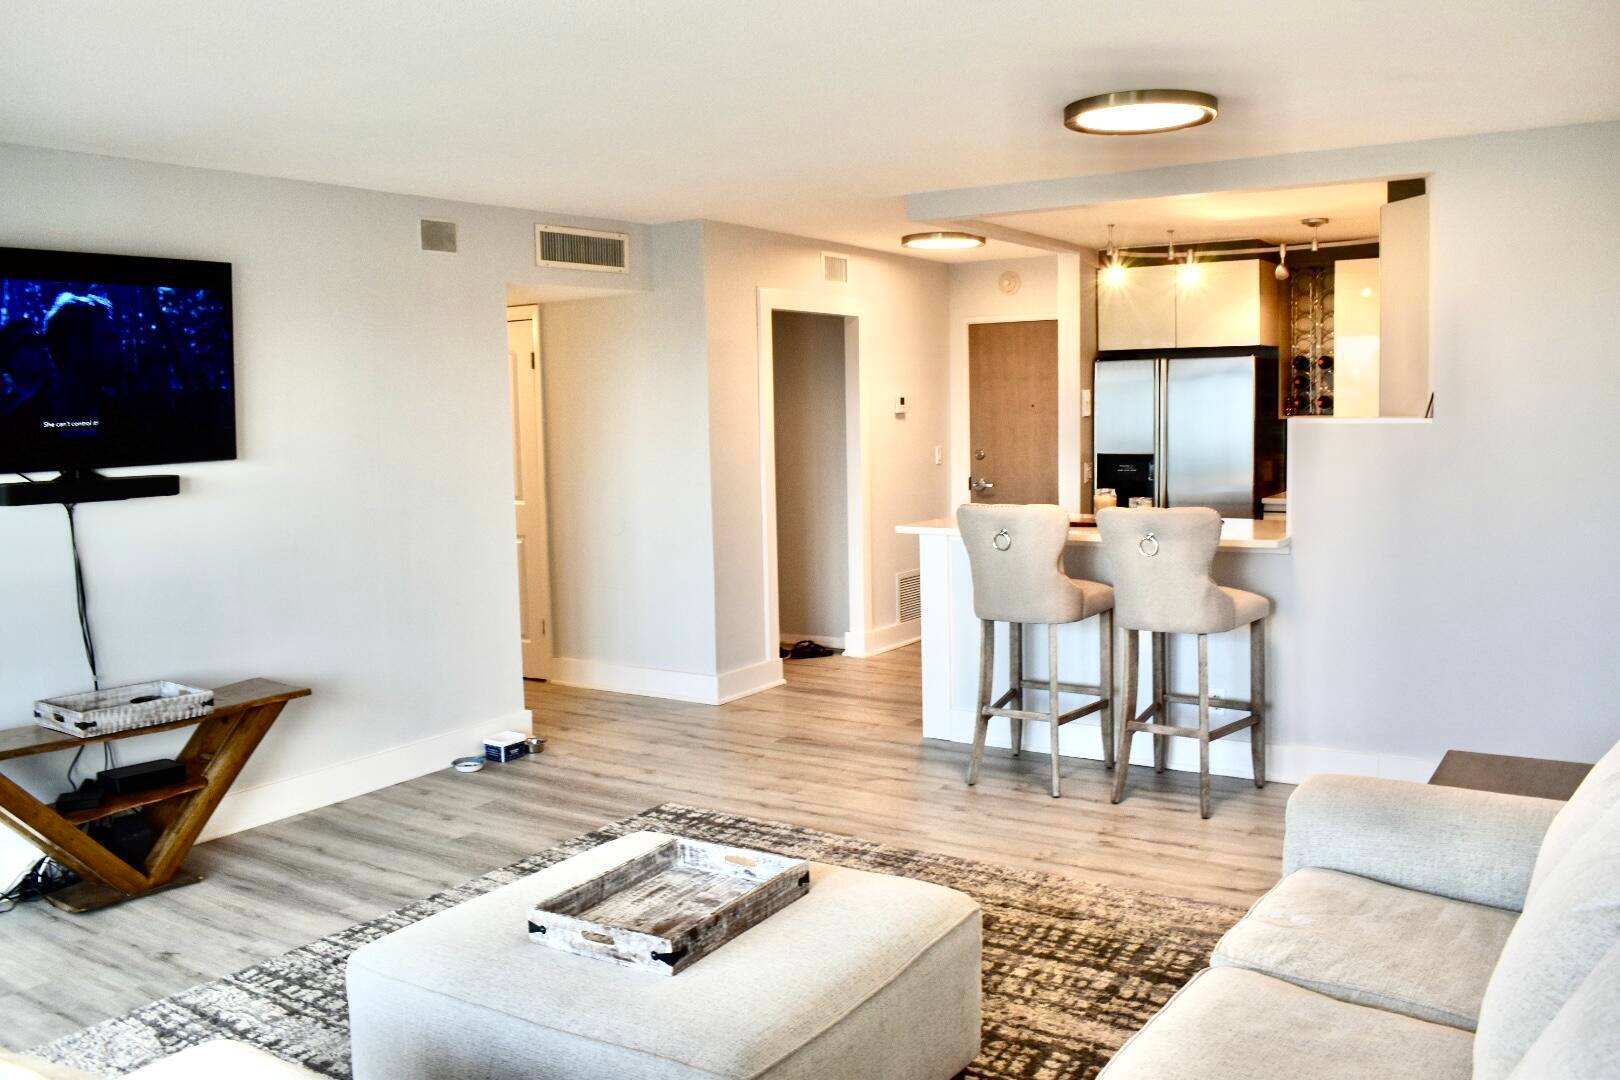 This exquisite 2 bedroom 2 bath condo is located in the prestigious Essex Tower off of Las Olas Boulevard, offering breathtaking views of the city and and water from the ...